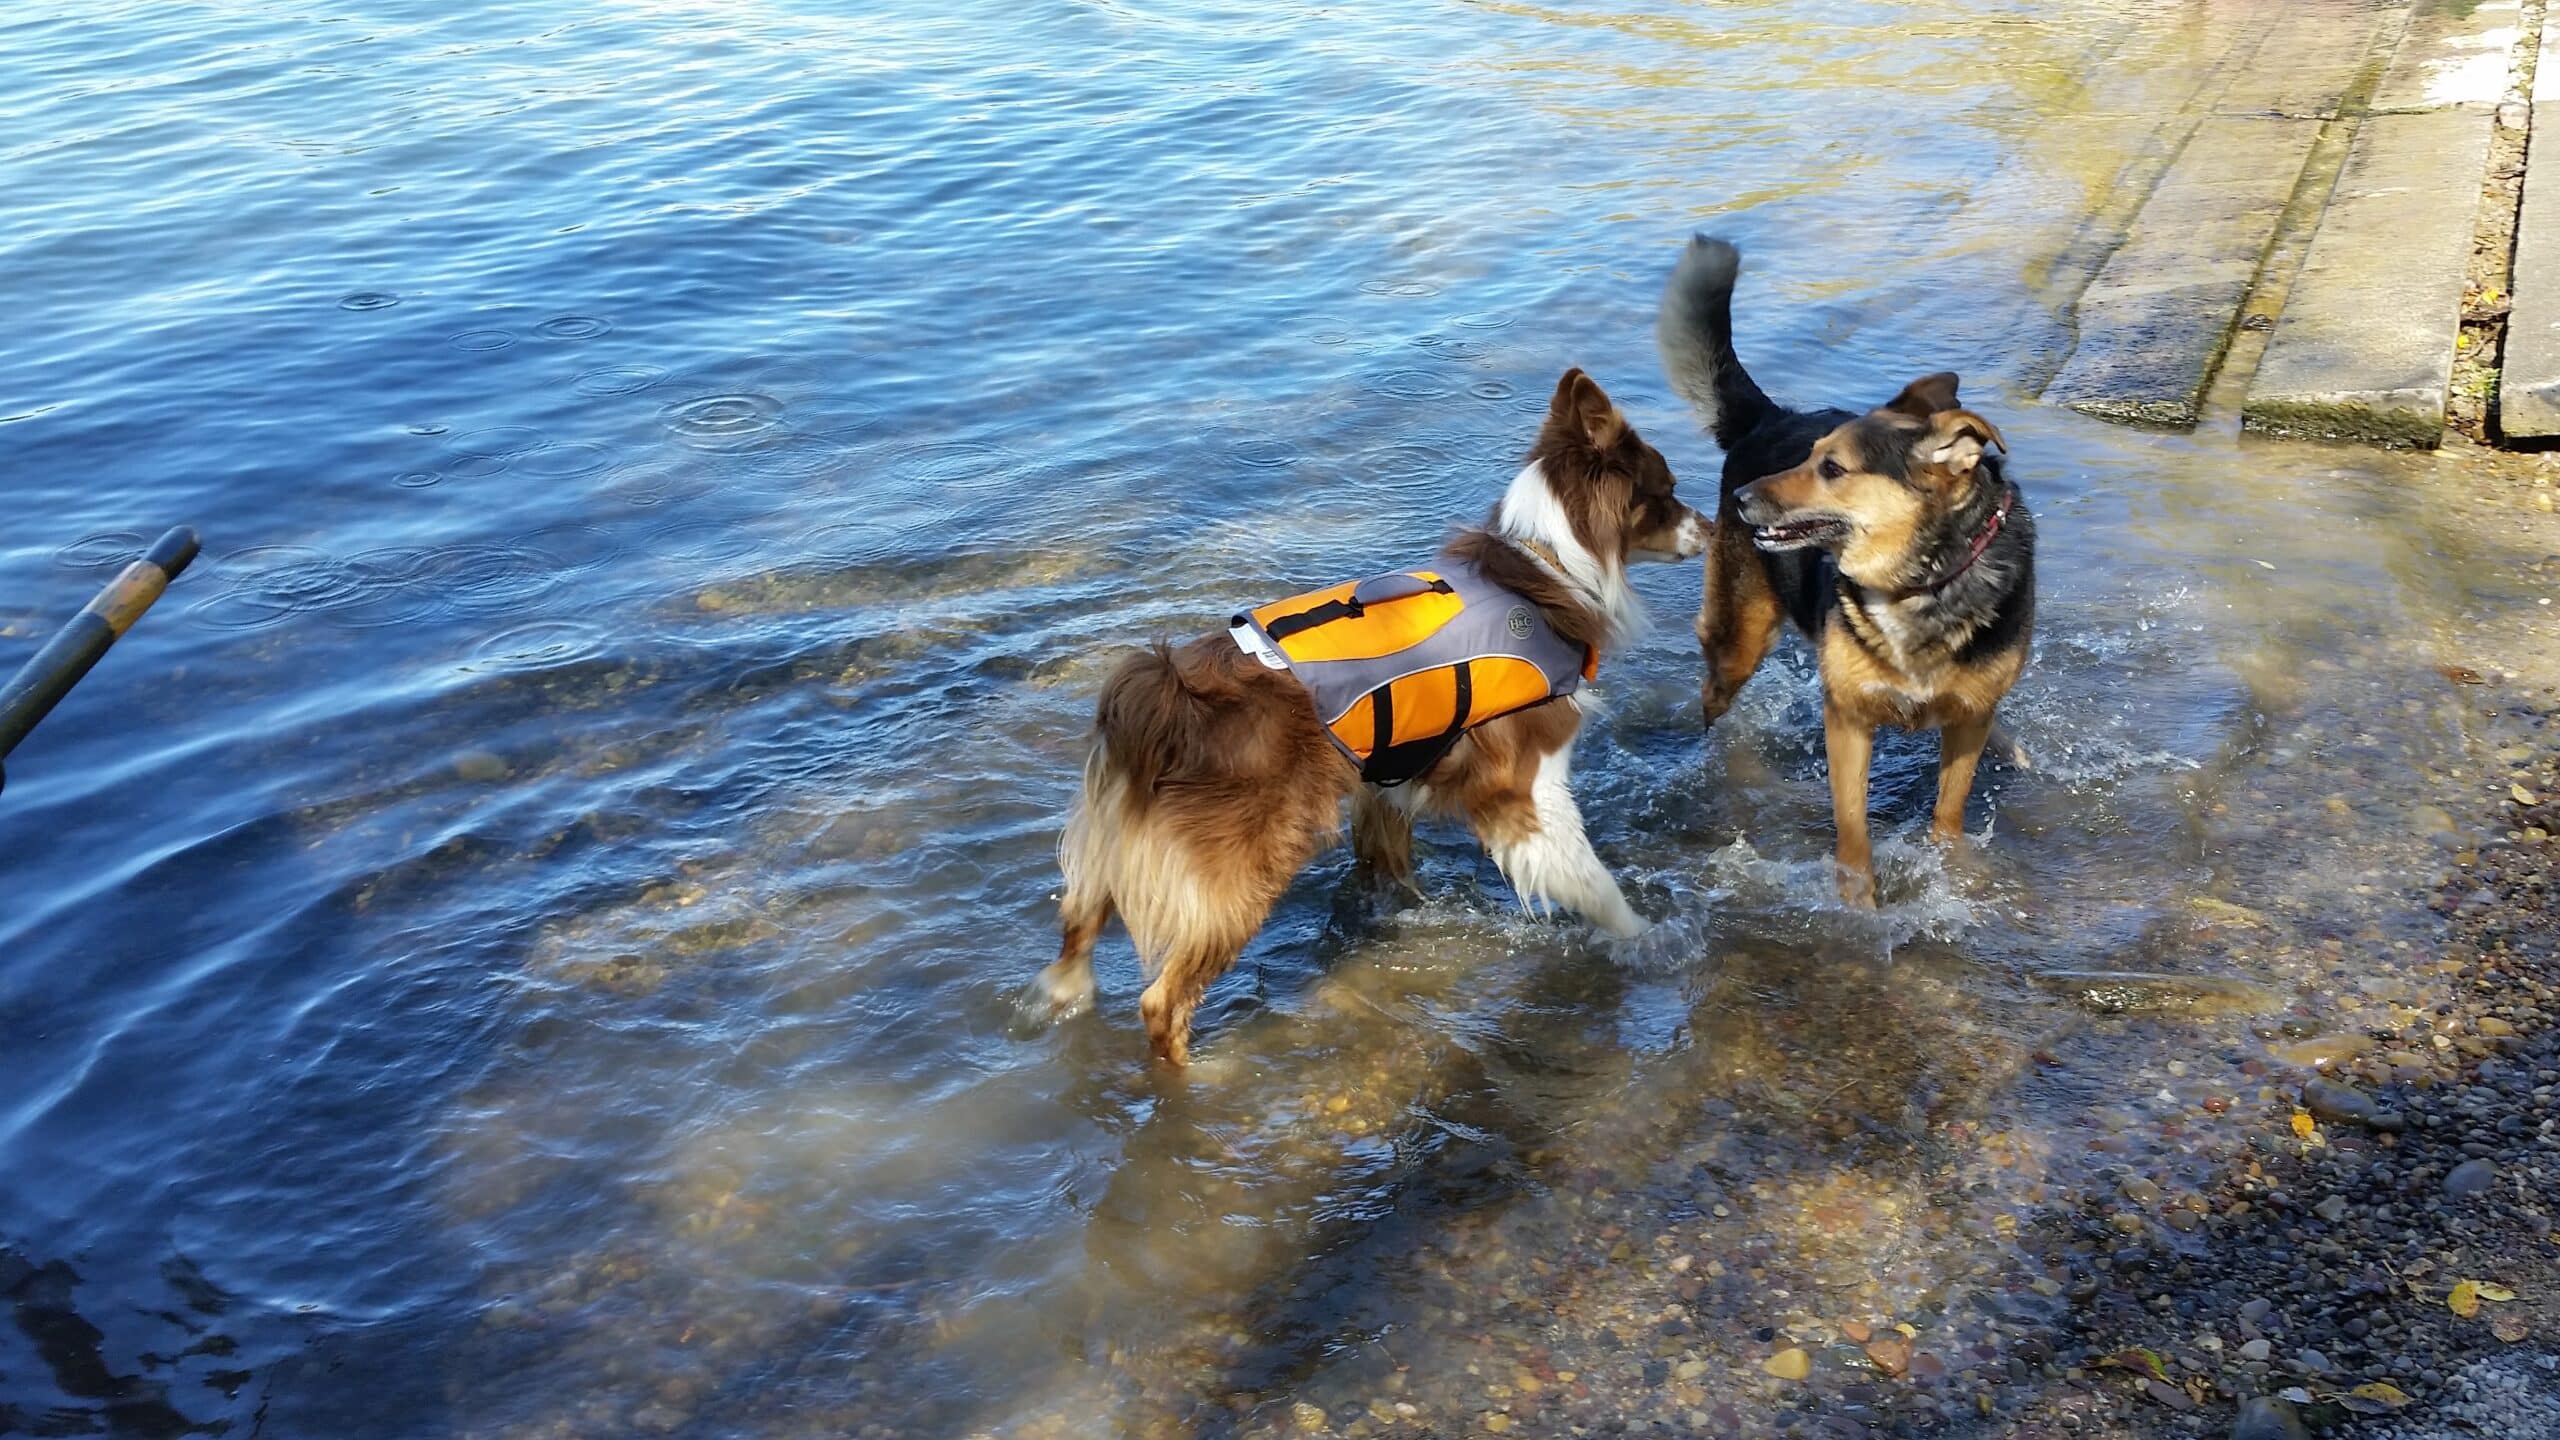 Life vests for dogs, a wise investment.